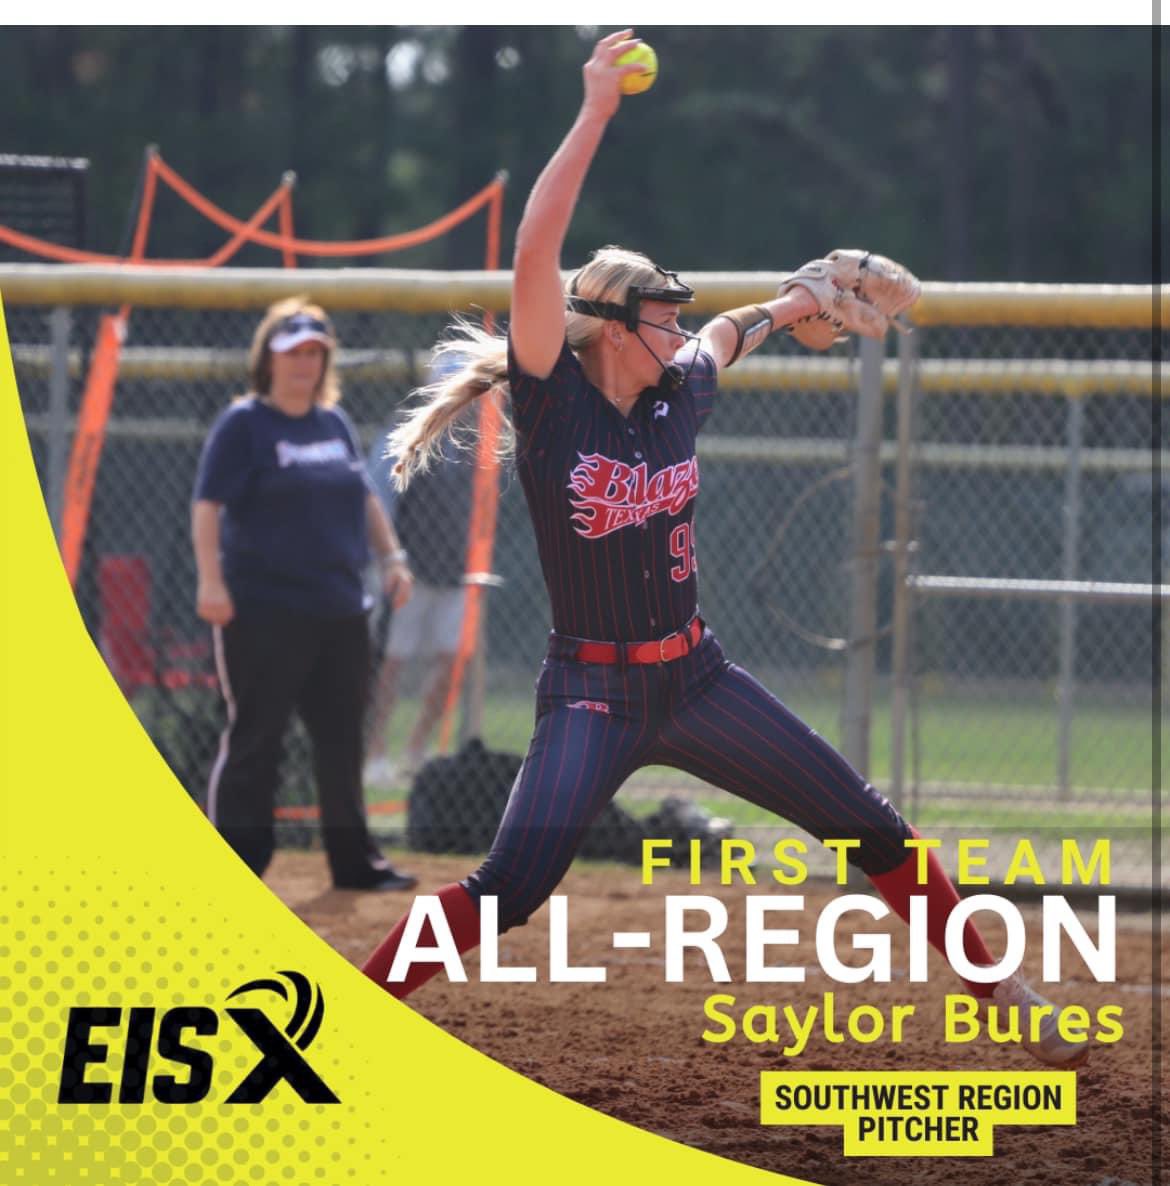 Way to go Saylor on being selected First Team All-Region Pitcher from Extra Inning Softball! #BlazeOn